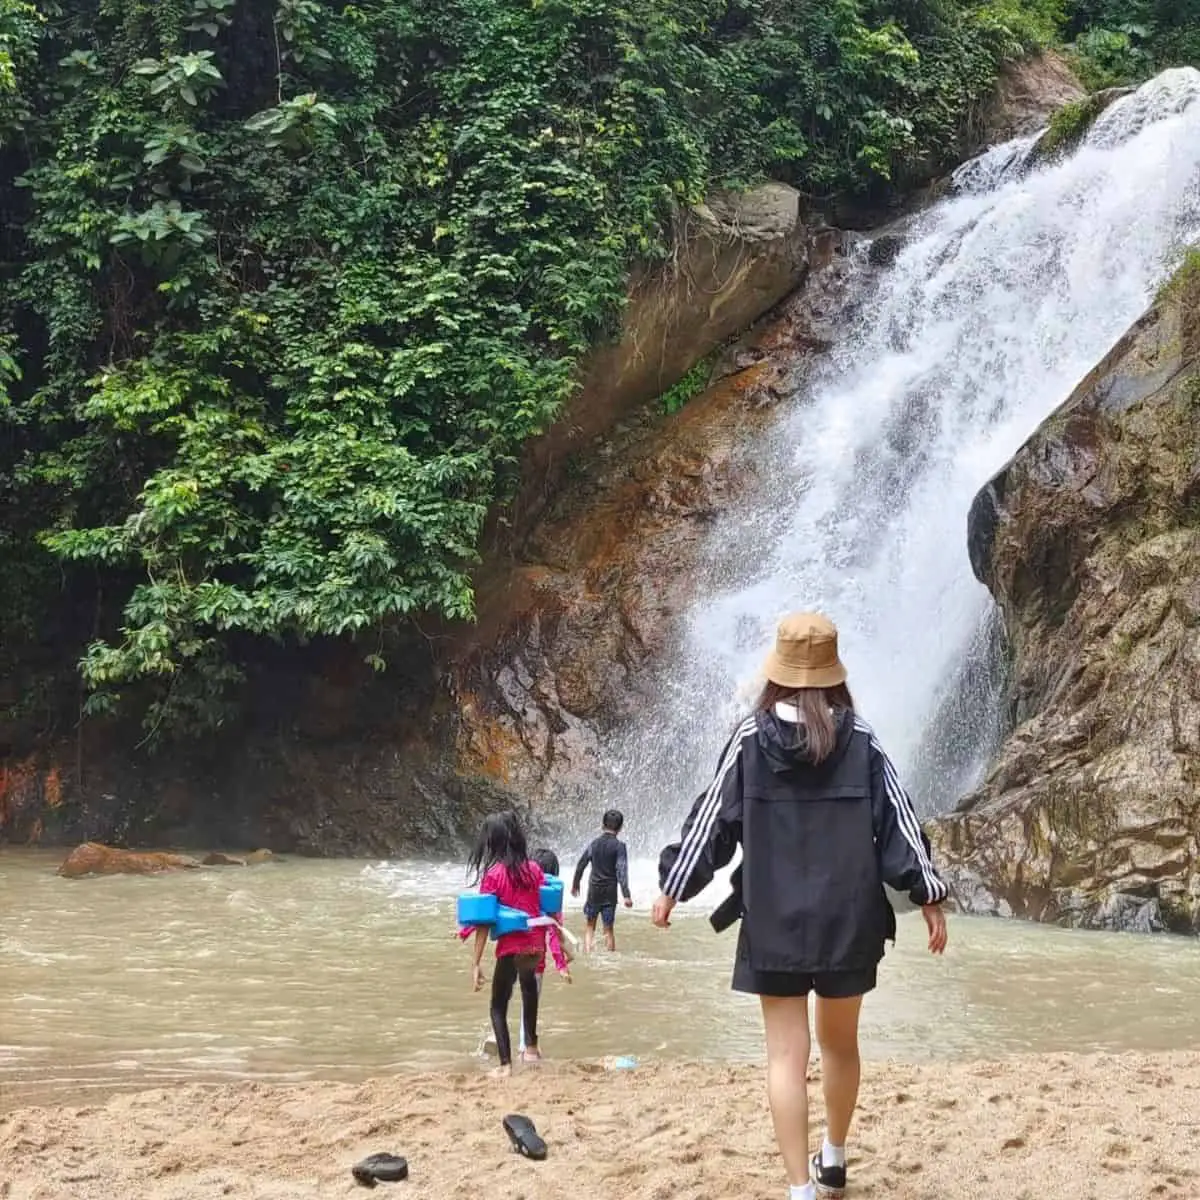 Sunga Dua Waterfall in Penang with raging waters from the mountains and a lady with a bucket hat in the middle